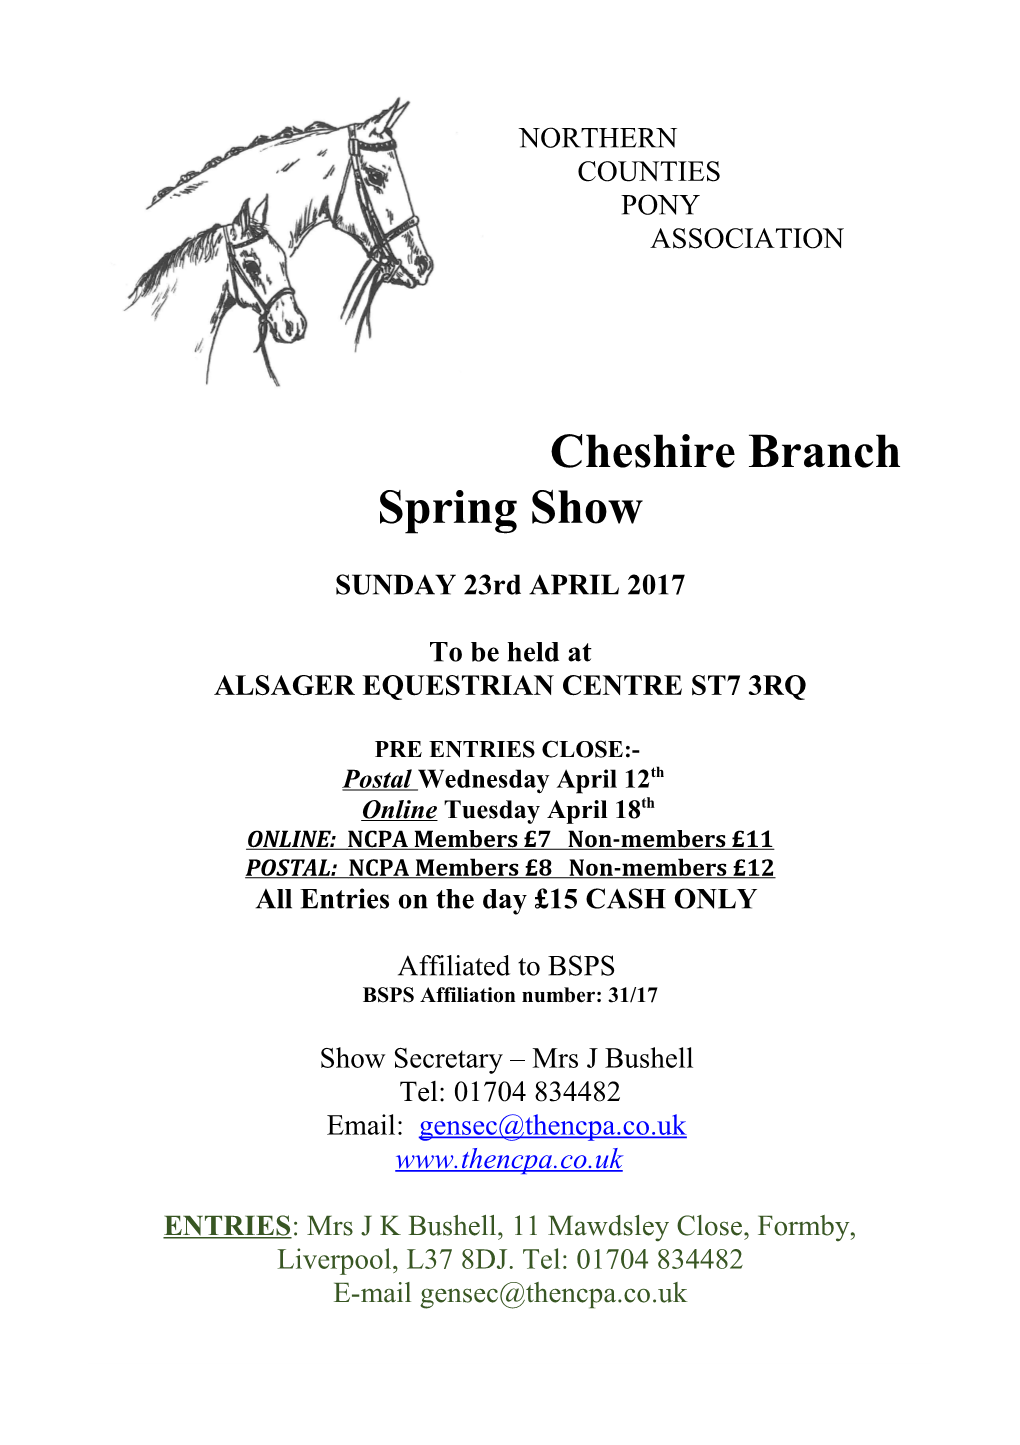 Cheshire Branch Spring Show